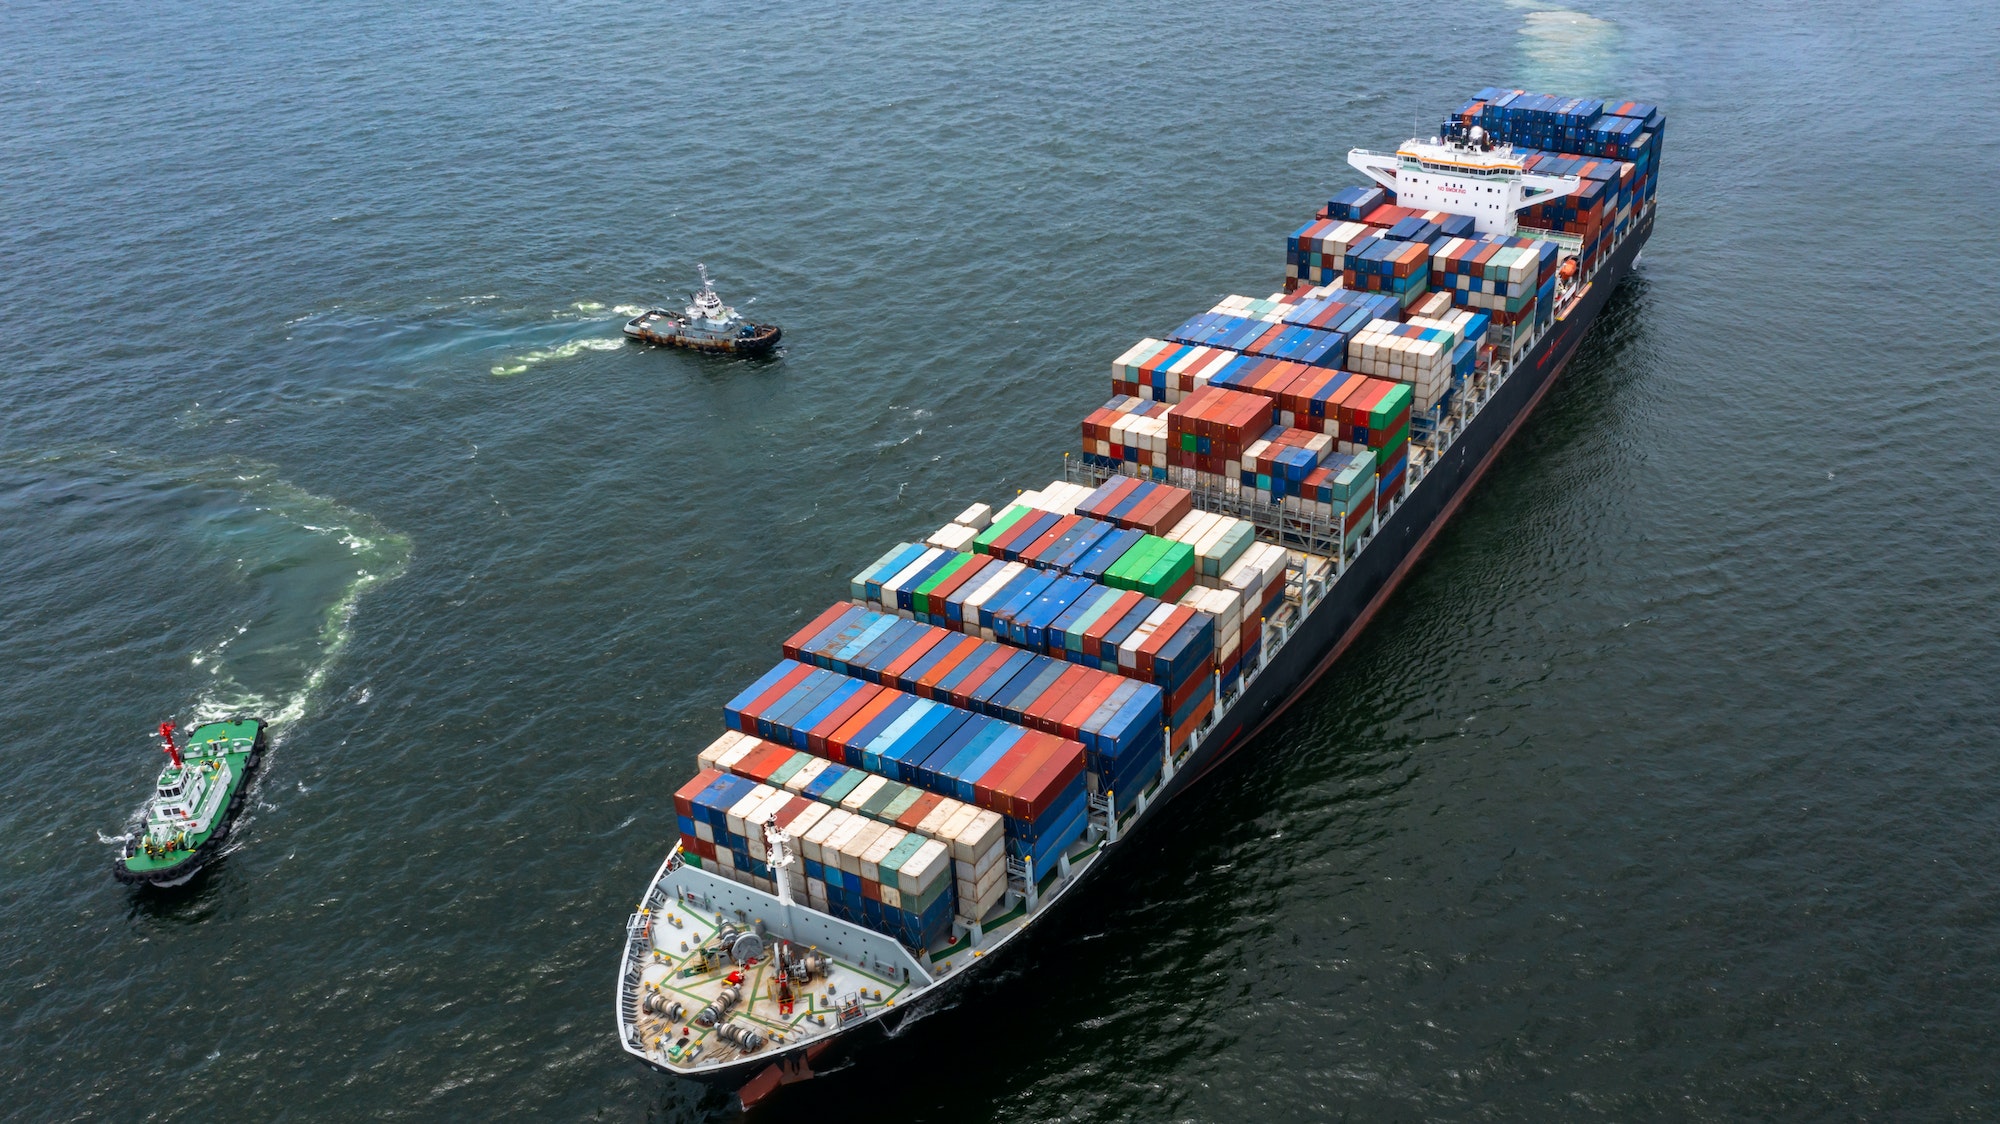 aerial-view-container-ship-cargo-freight-shipping-maritime-vessel-global-business-supply-chain-